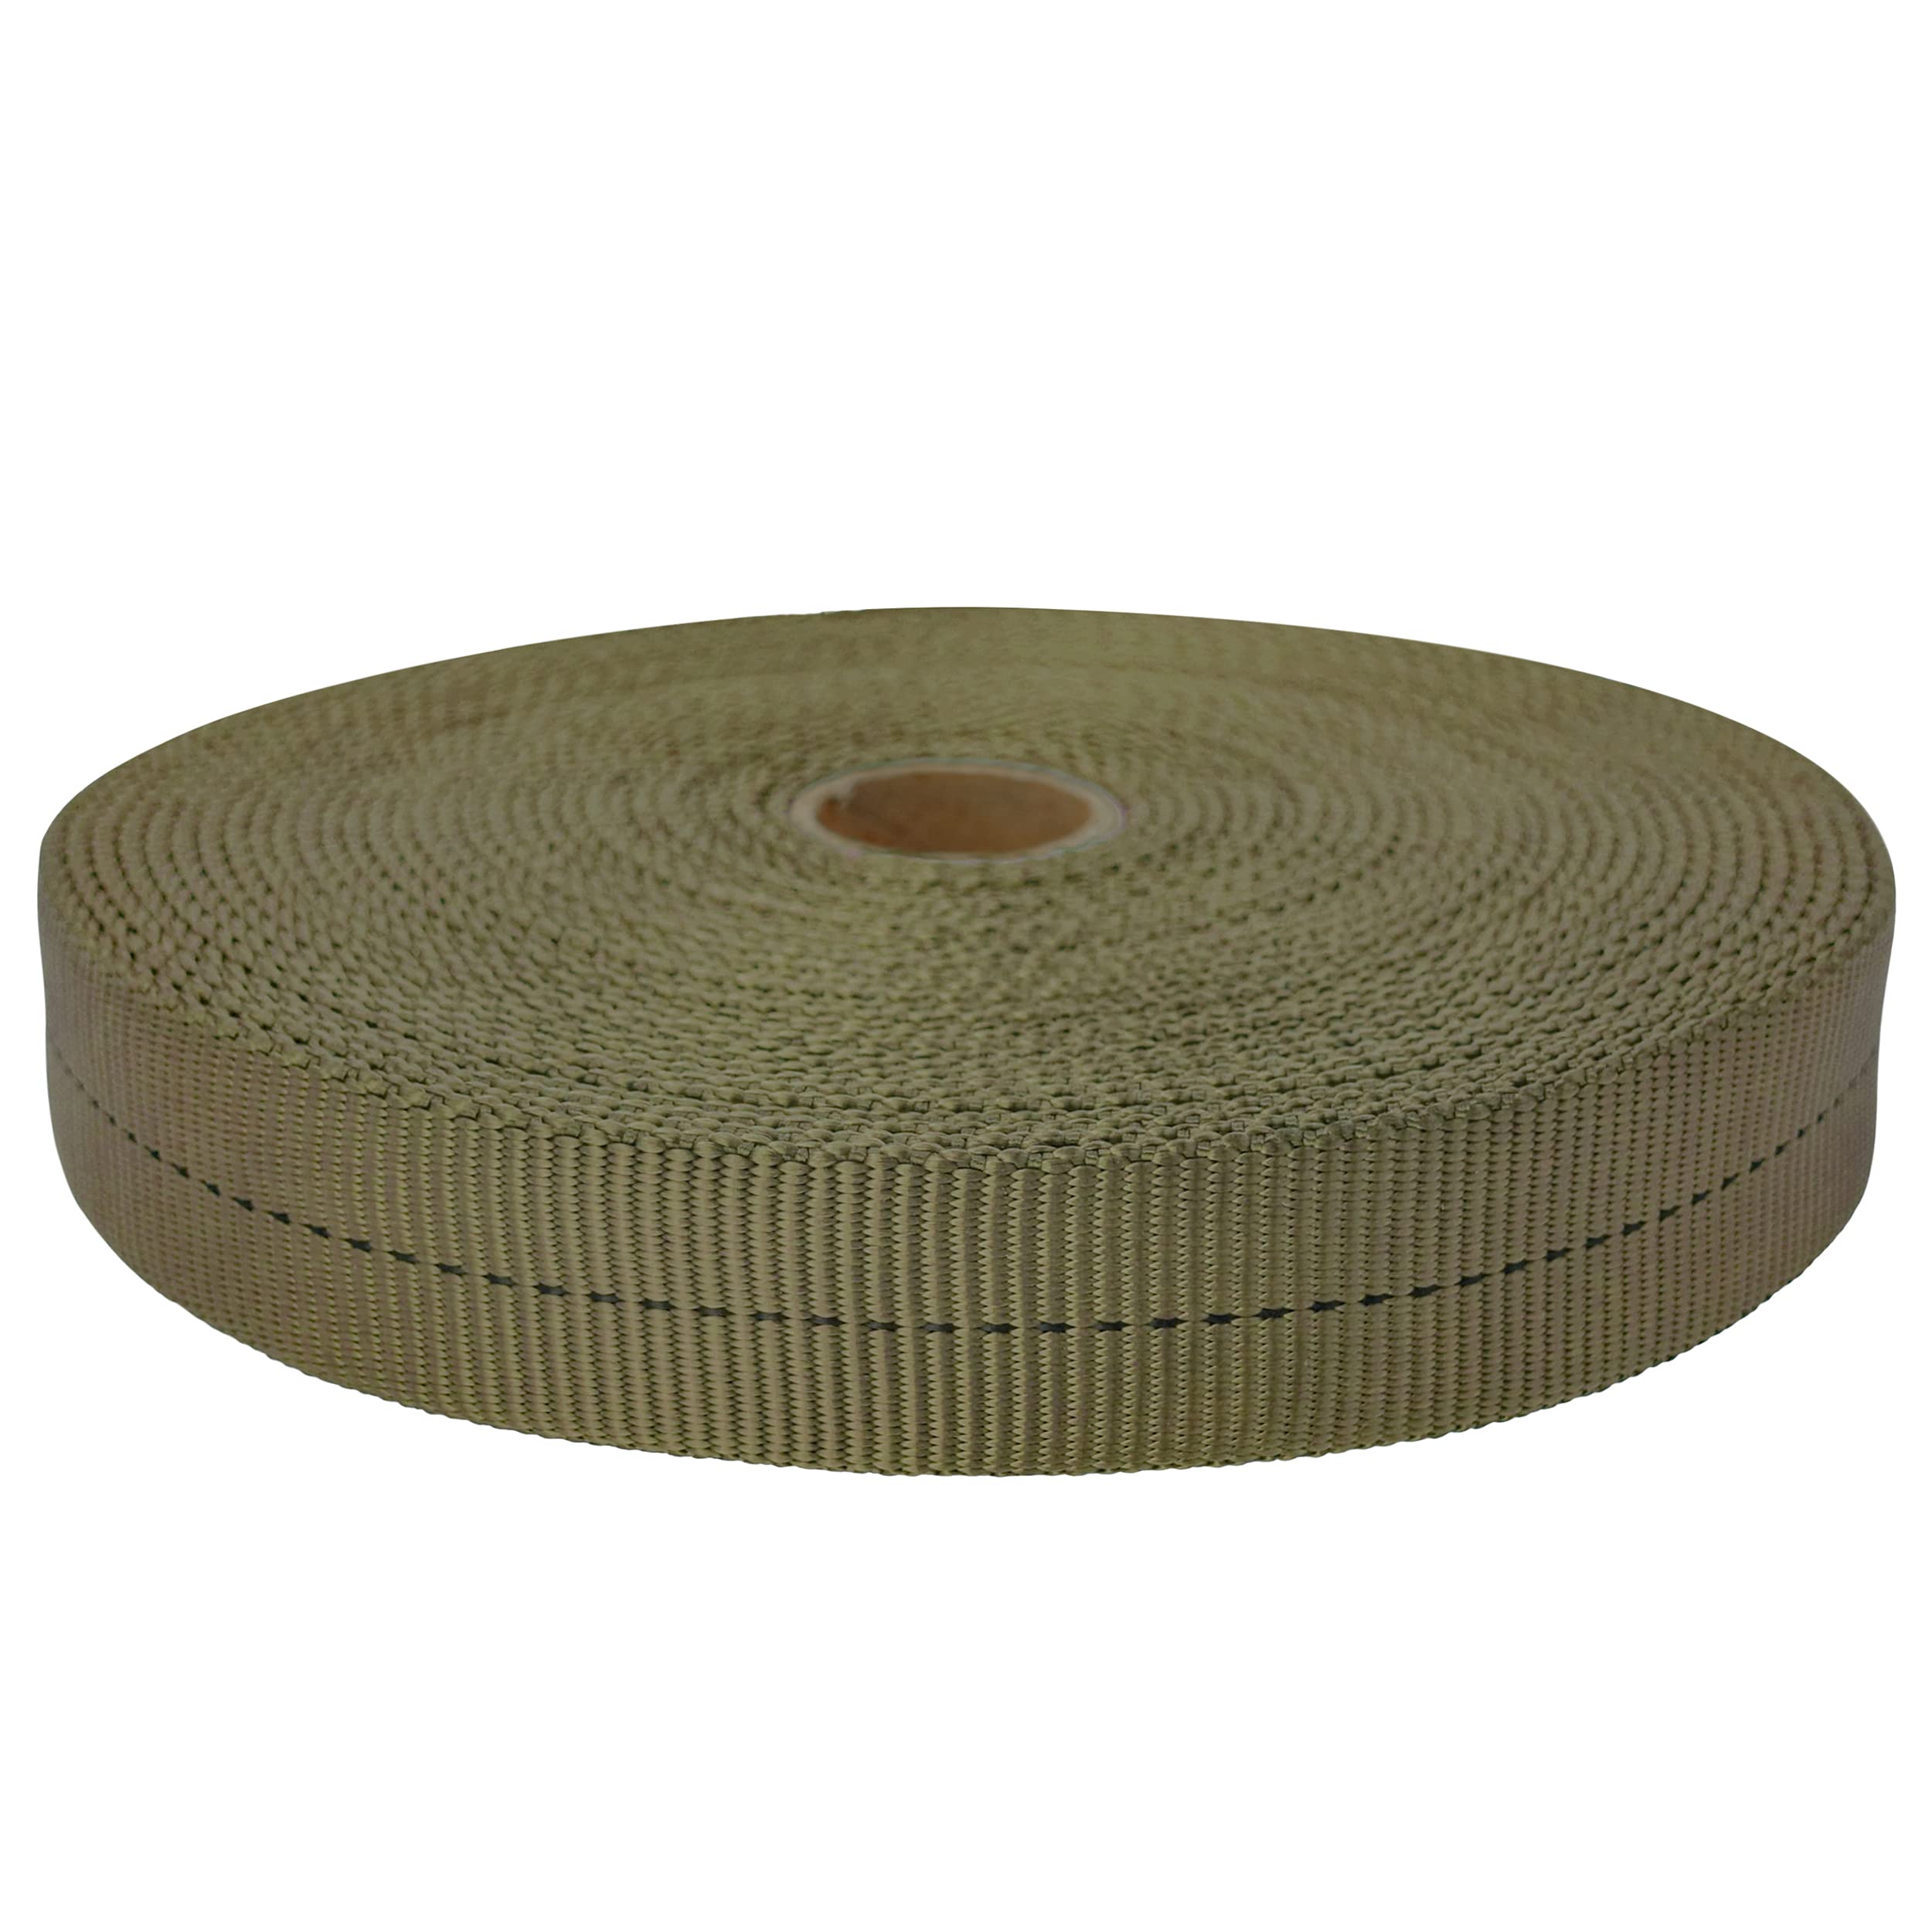 Custom Tubular Nylon Webbing 1 Inch Manufacturers and Suppliers